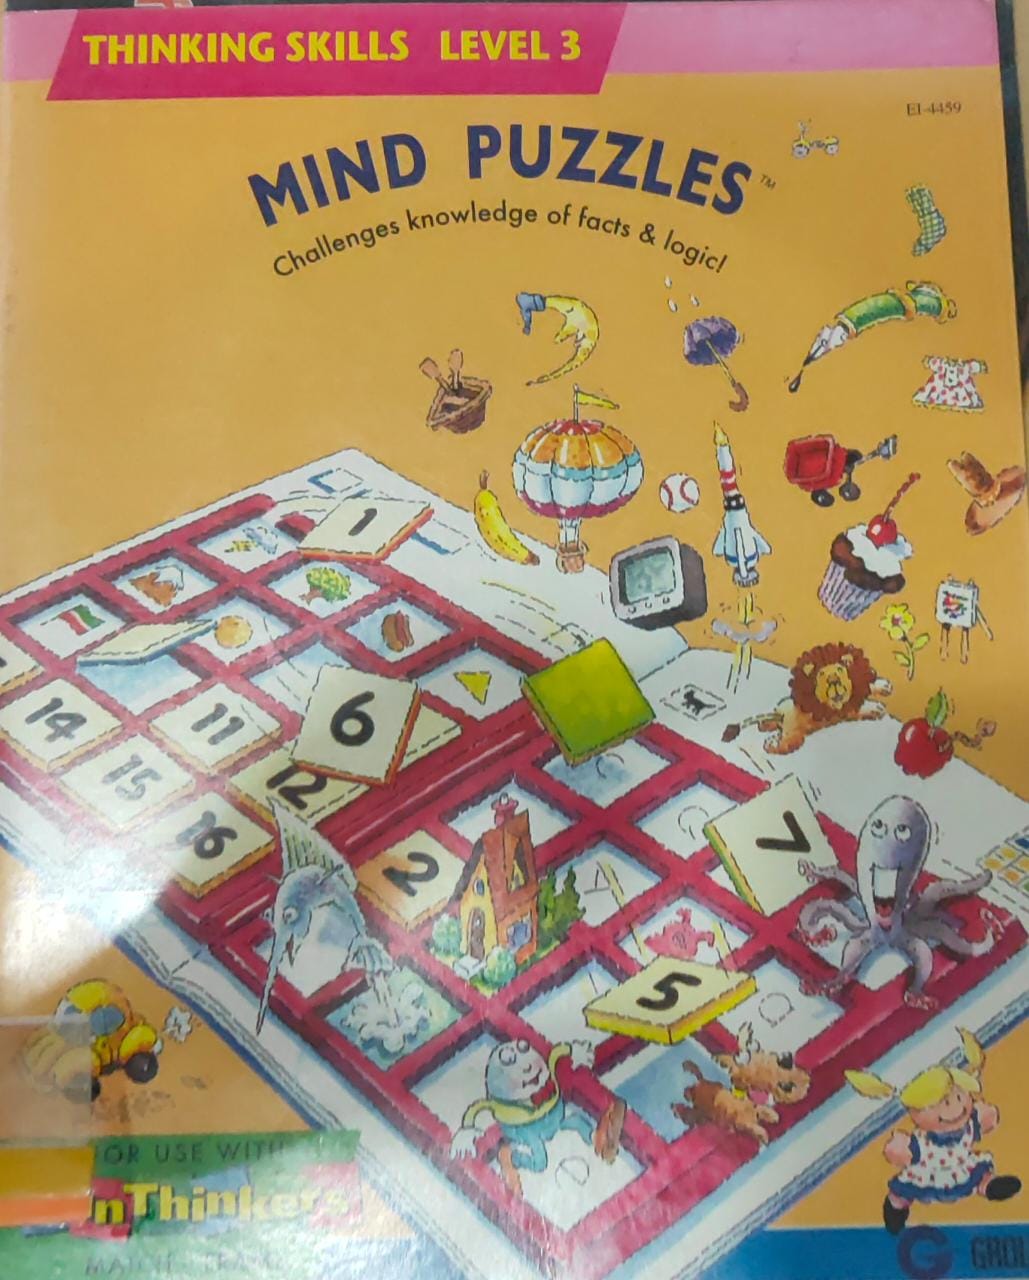 MIND puzzles :  Challenges knowledge of facts and logic!